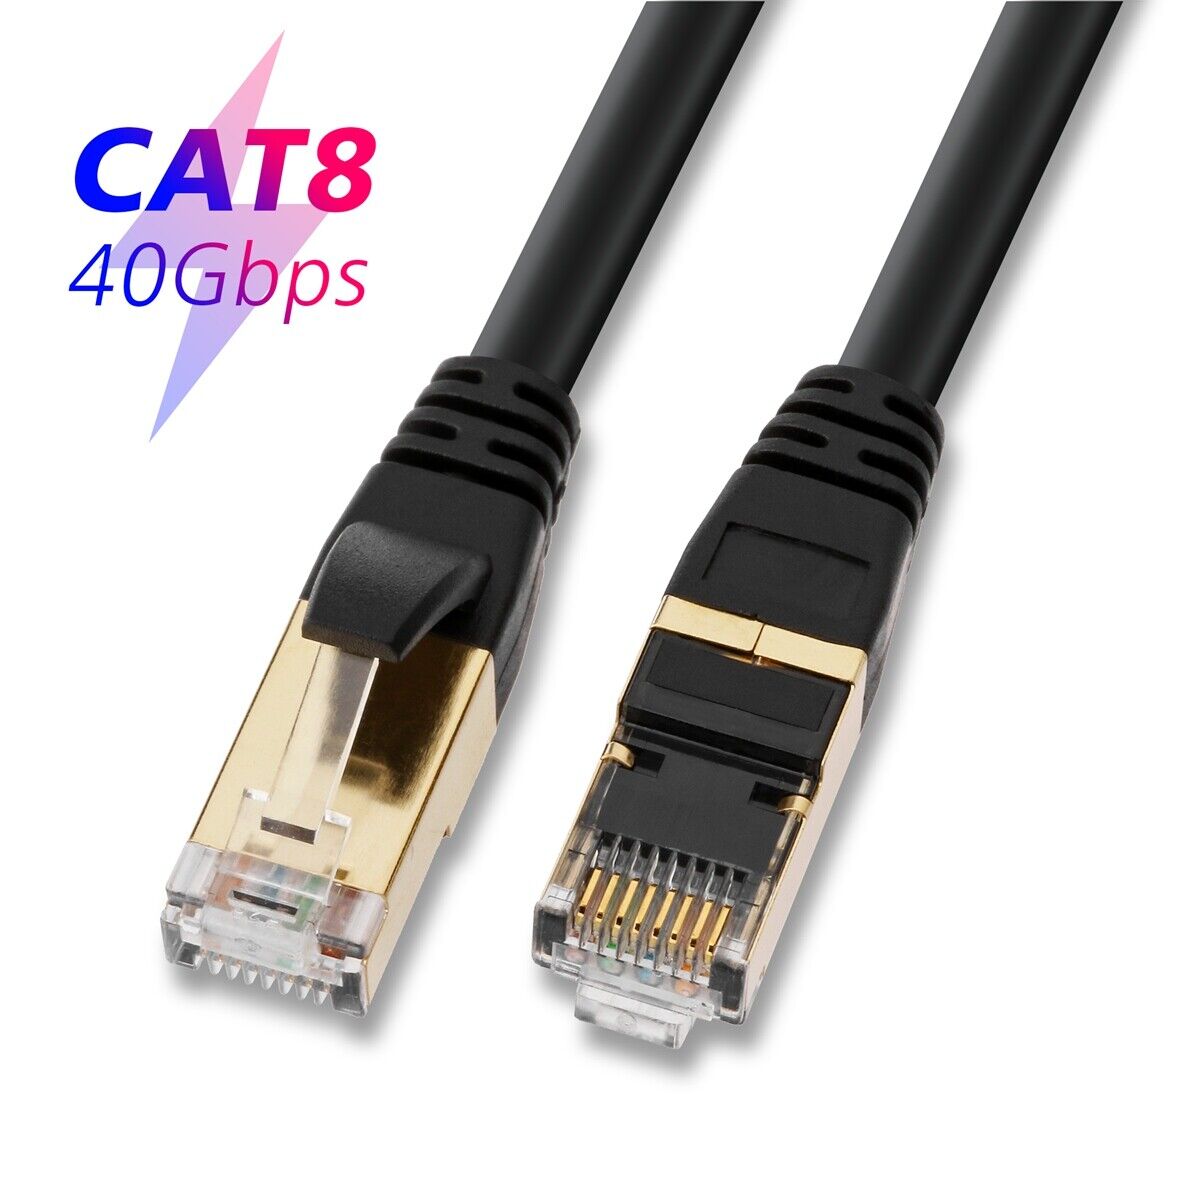 CAT 8 Cat 7 Ethernet Cable SSTP Shielded Network Cable Category 8 RJ45 26AWG Lot